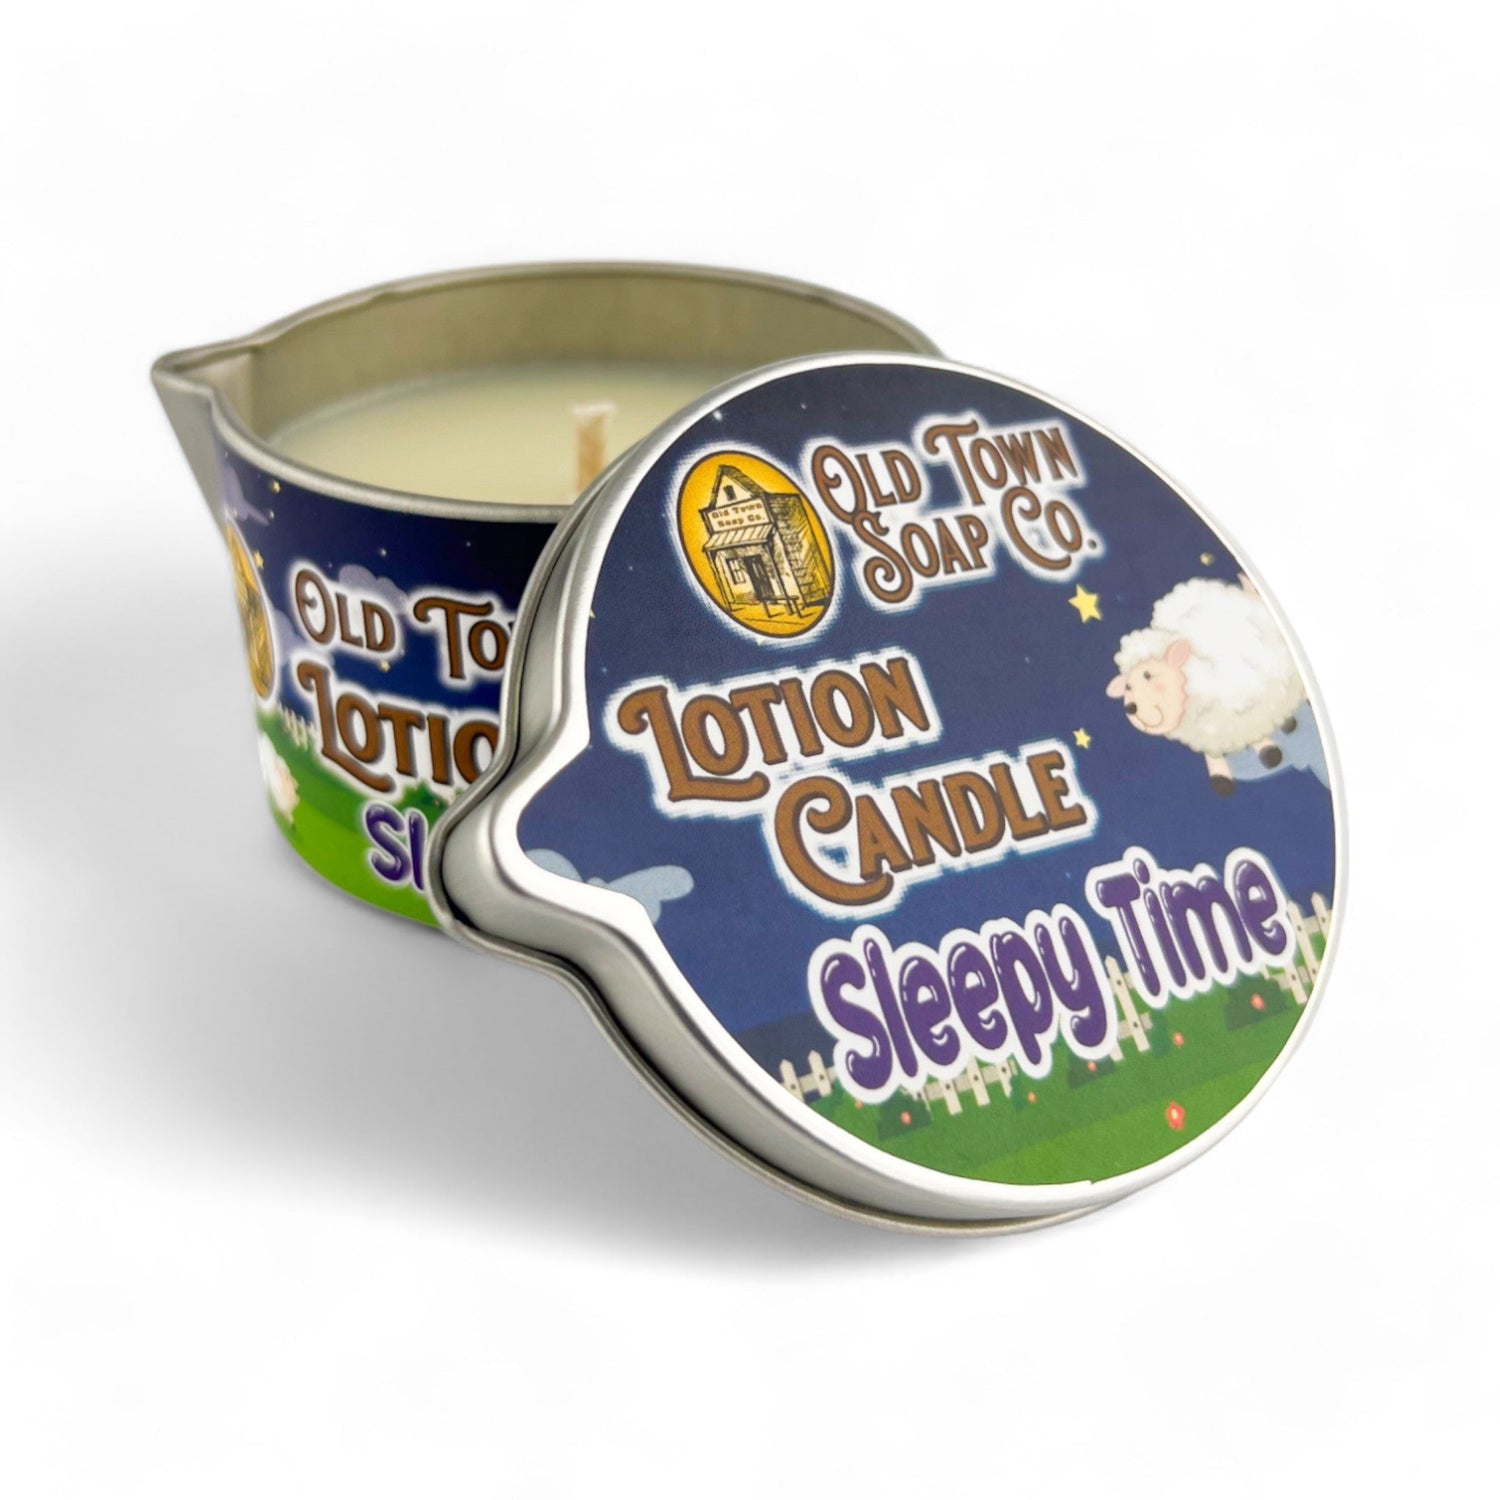 Sleepy Time -Lotion Candles - Old Town Soap Co.